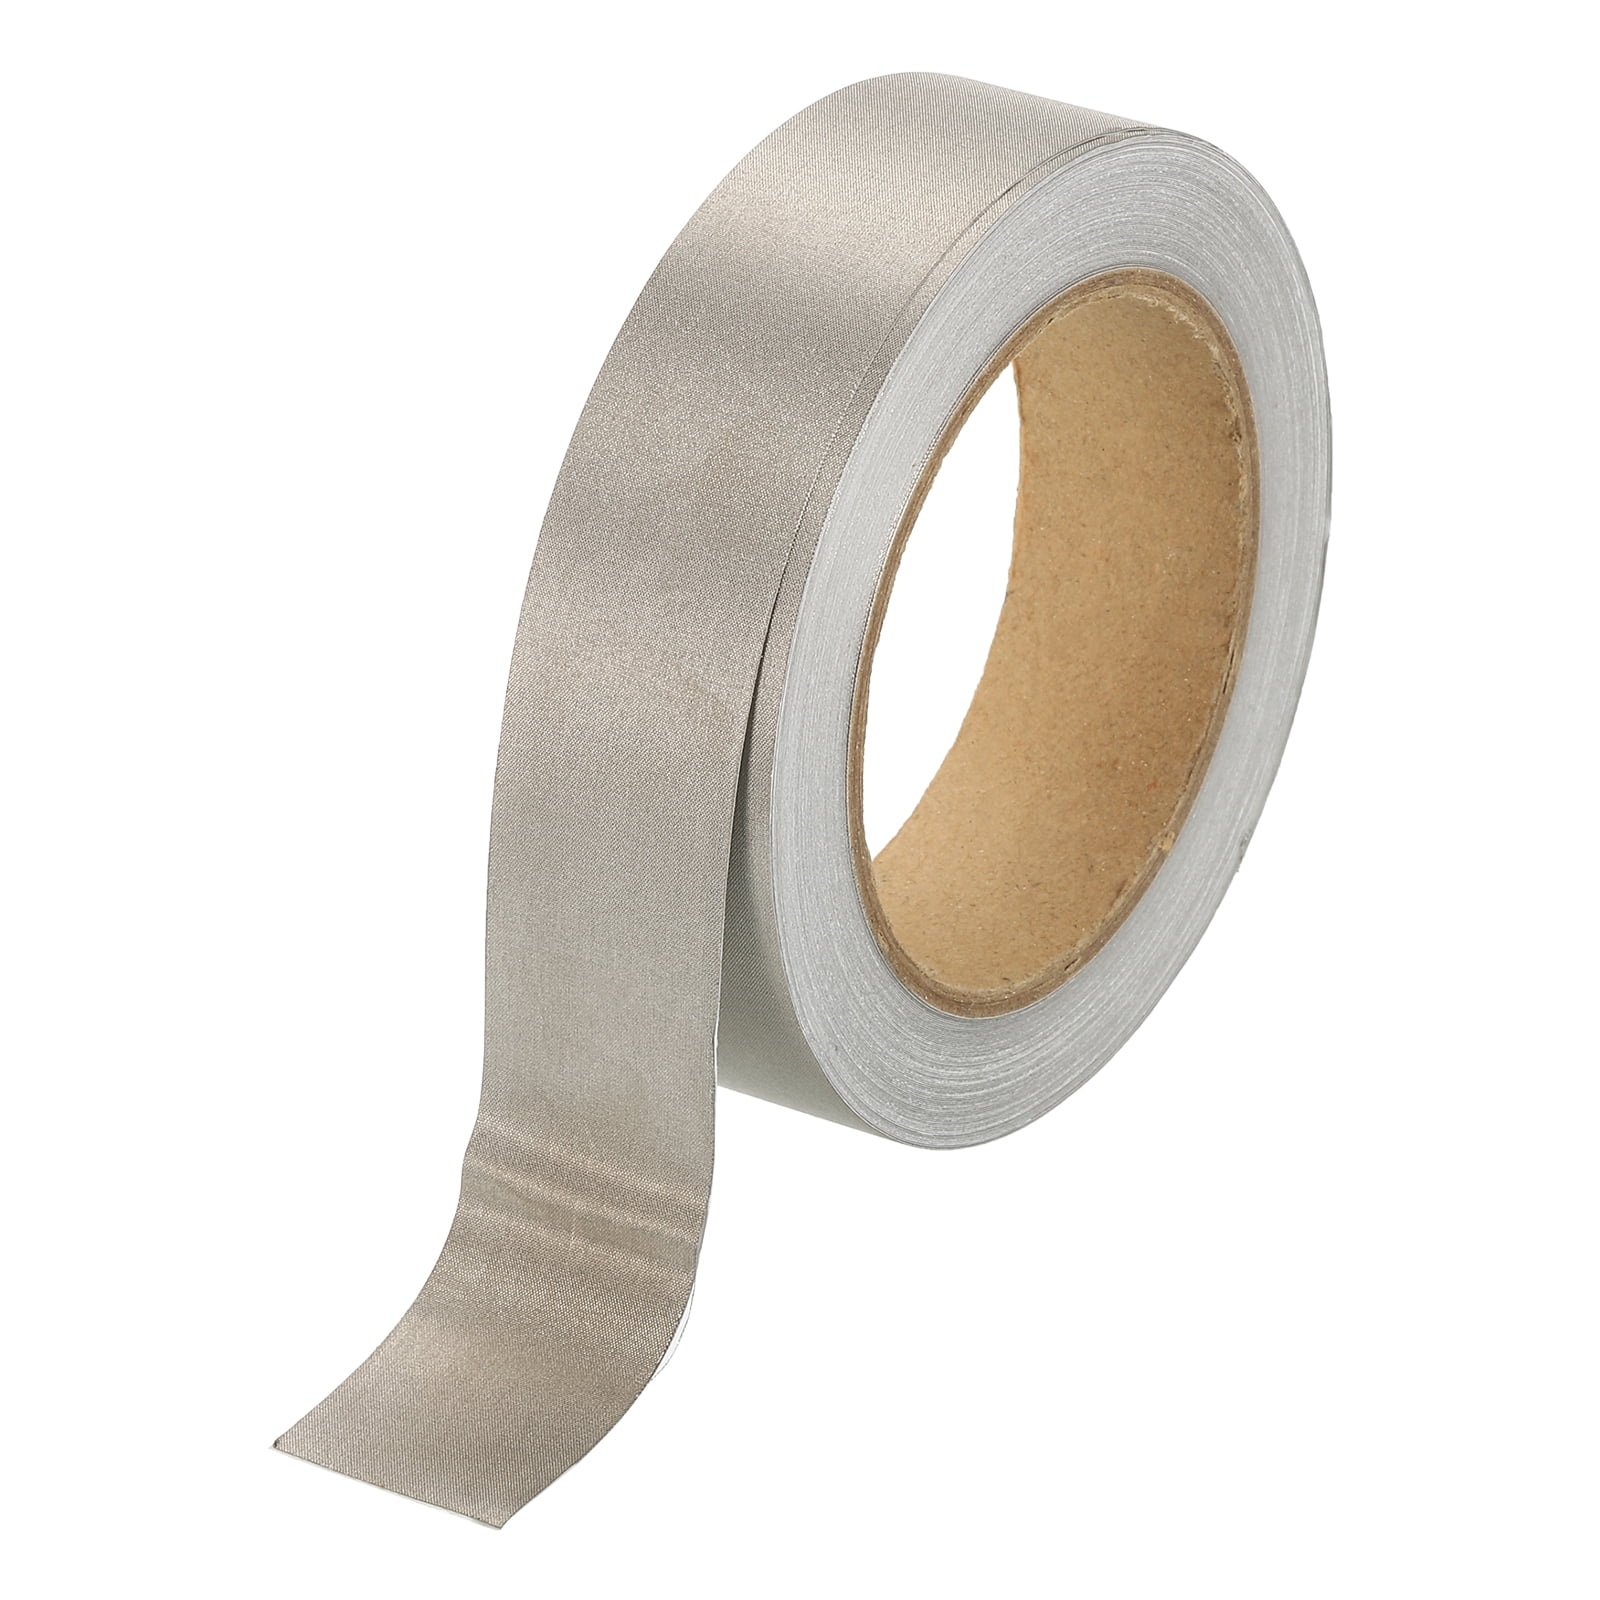 Amylove 3 Roll Faraday Tape Double Conductive Fabric Tape Faraday Fabric  Tape Faraday Cloth Tape Conductive Adhesive Tape Roll (1in x 65ft):  : Industrial & Scientific